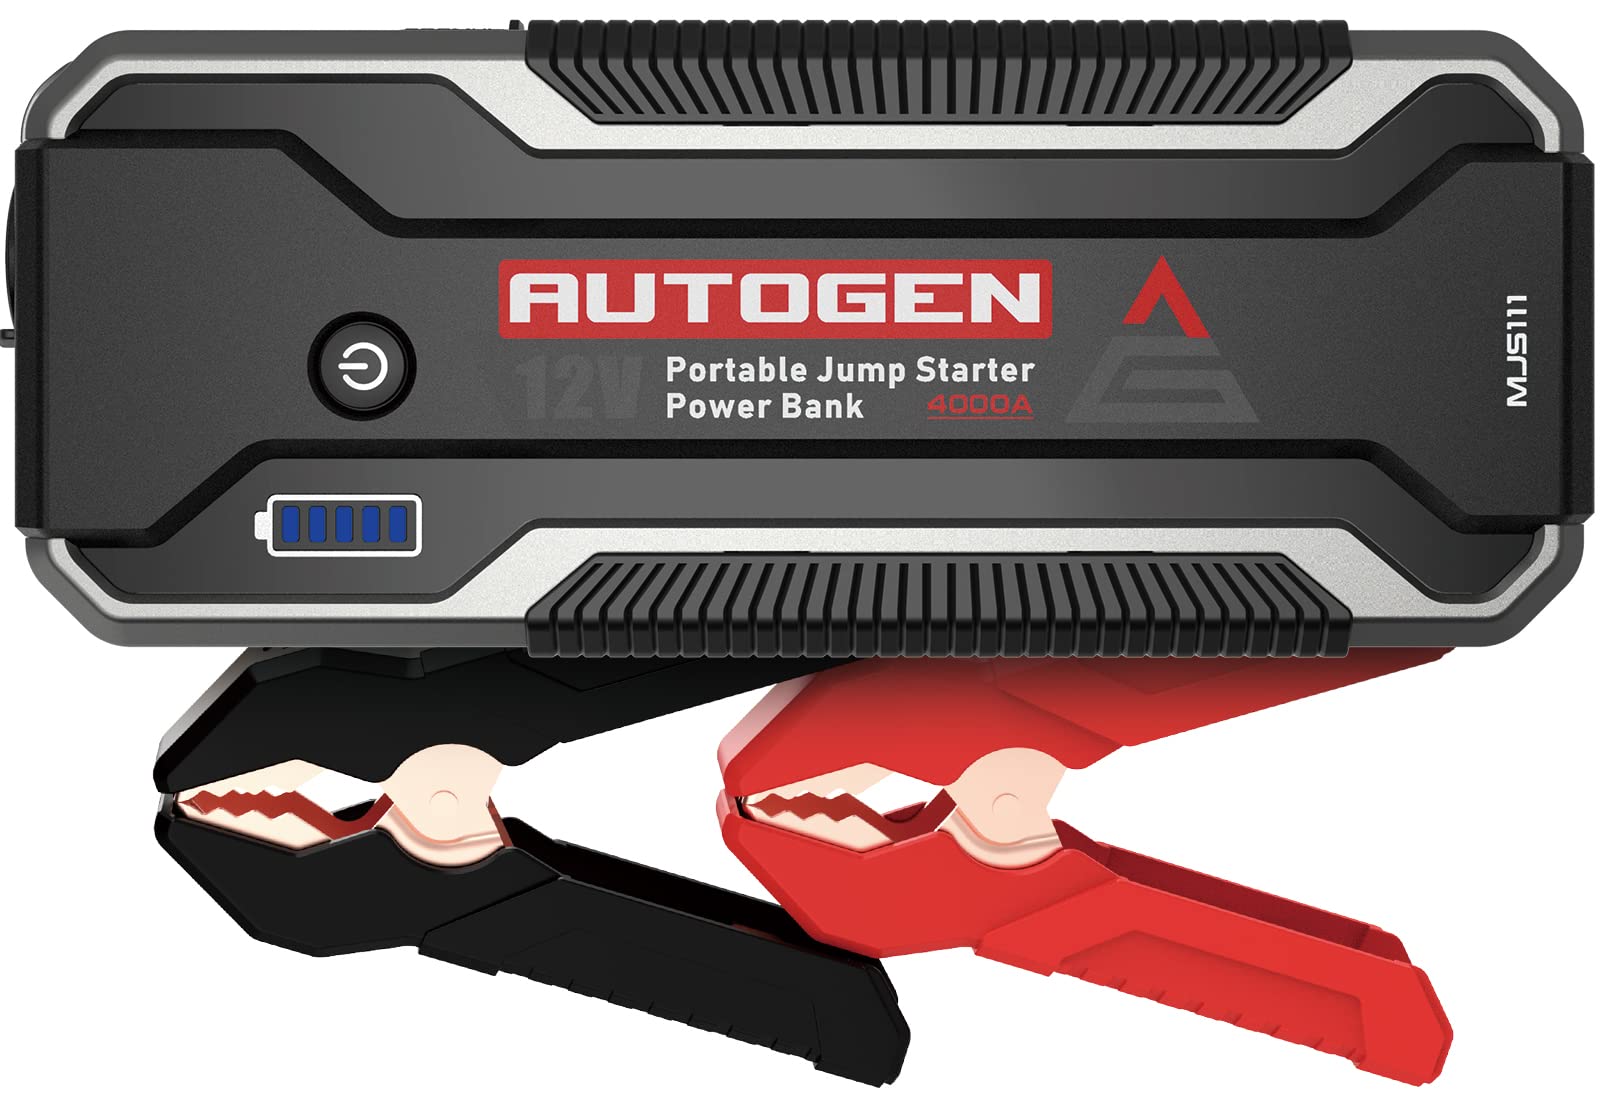 Autogen 4000A Car Battery Jump Starter Lithium Jump Box (100L Gas And 100L Diesel Engine), Auto Battery Booster Pack, Portable C